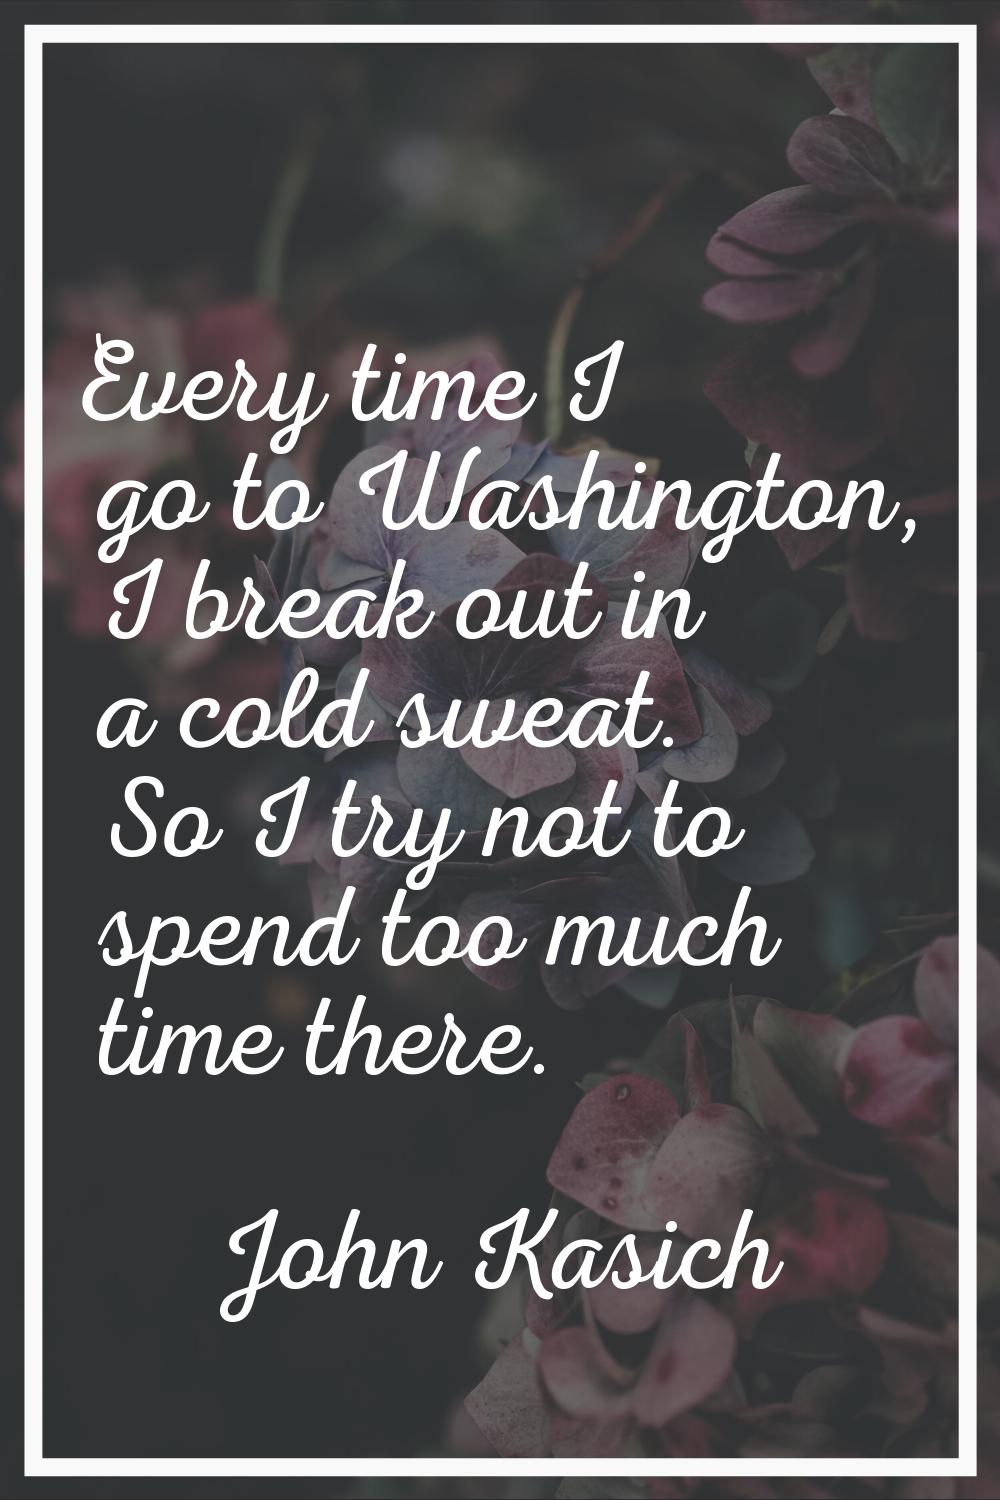 Every time I go to Washington, I break out in a cold sweat. So I try not to spend too much time the